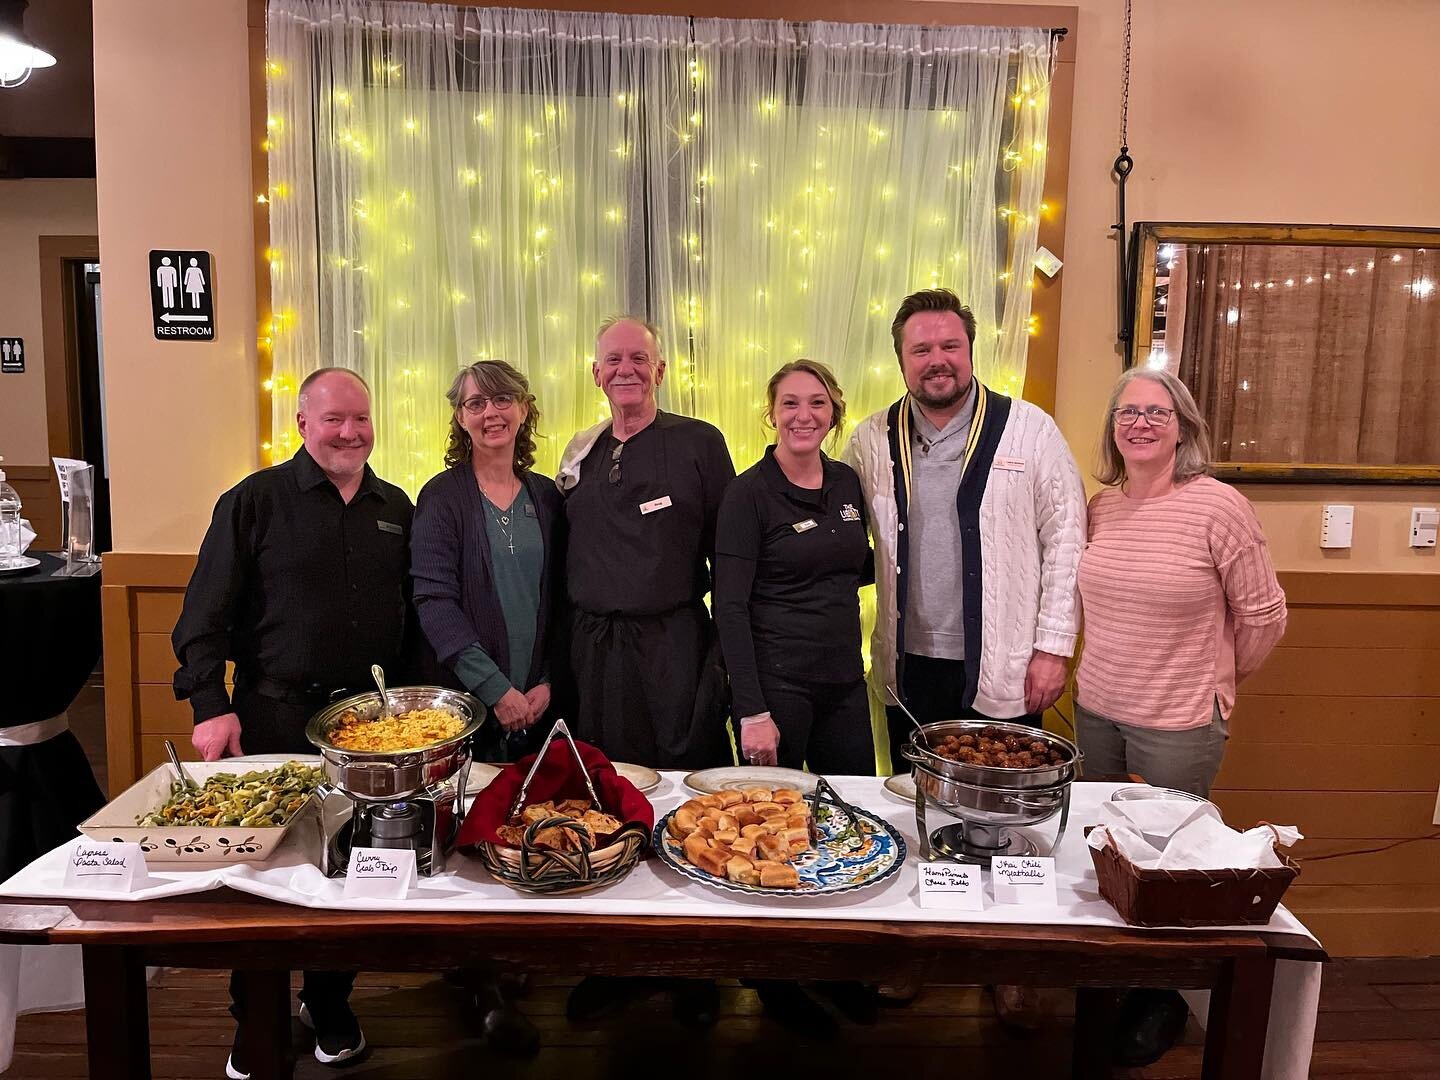 There&rsquo;s nothing better than serving good food in a beautiful place!

Check out a few shots from our tasting dinner last night! We served samples from our menu, house wines, and @angrytrollbrewing&rsquo;s craft beer. Plus, we had @runaway_bride_